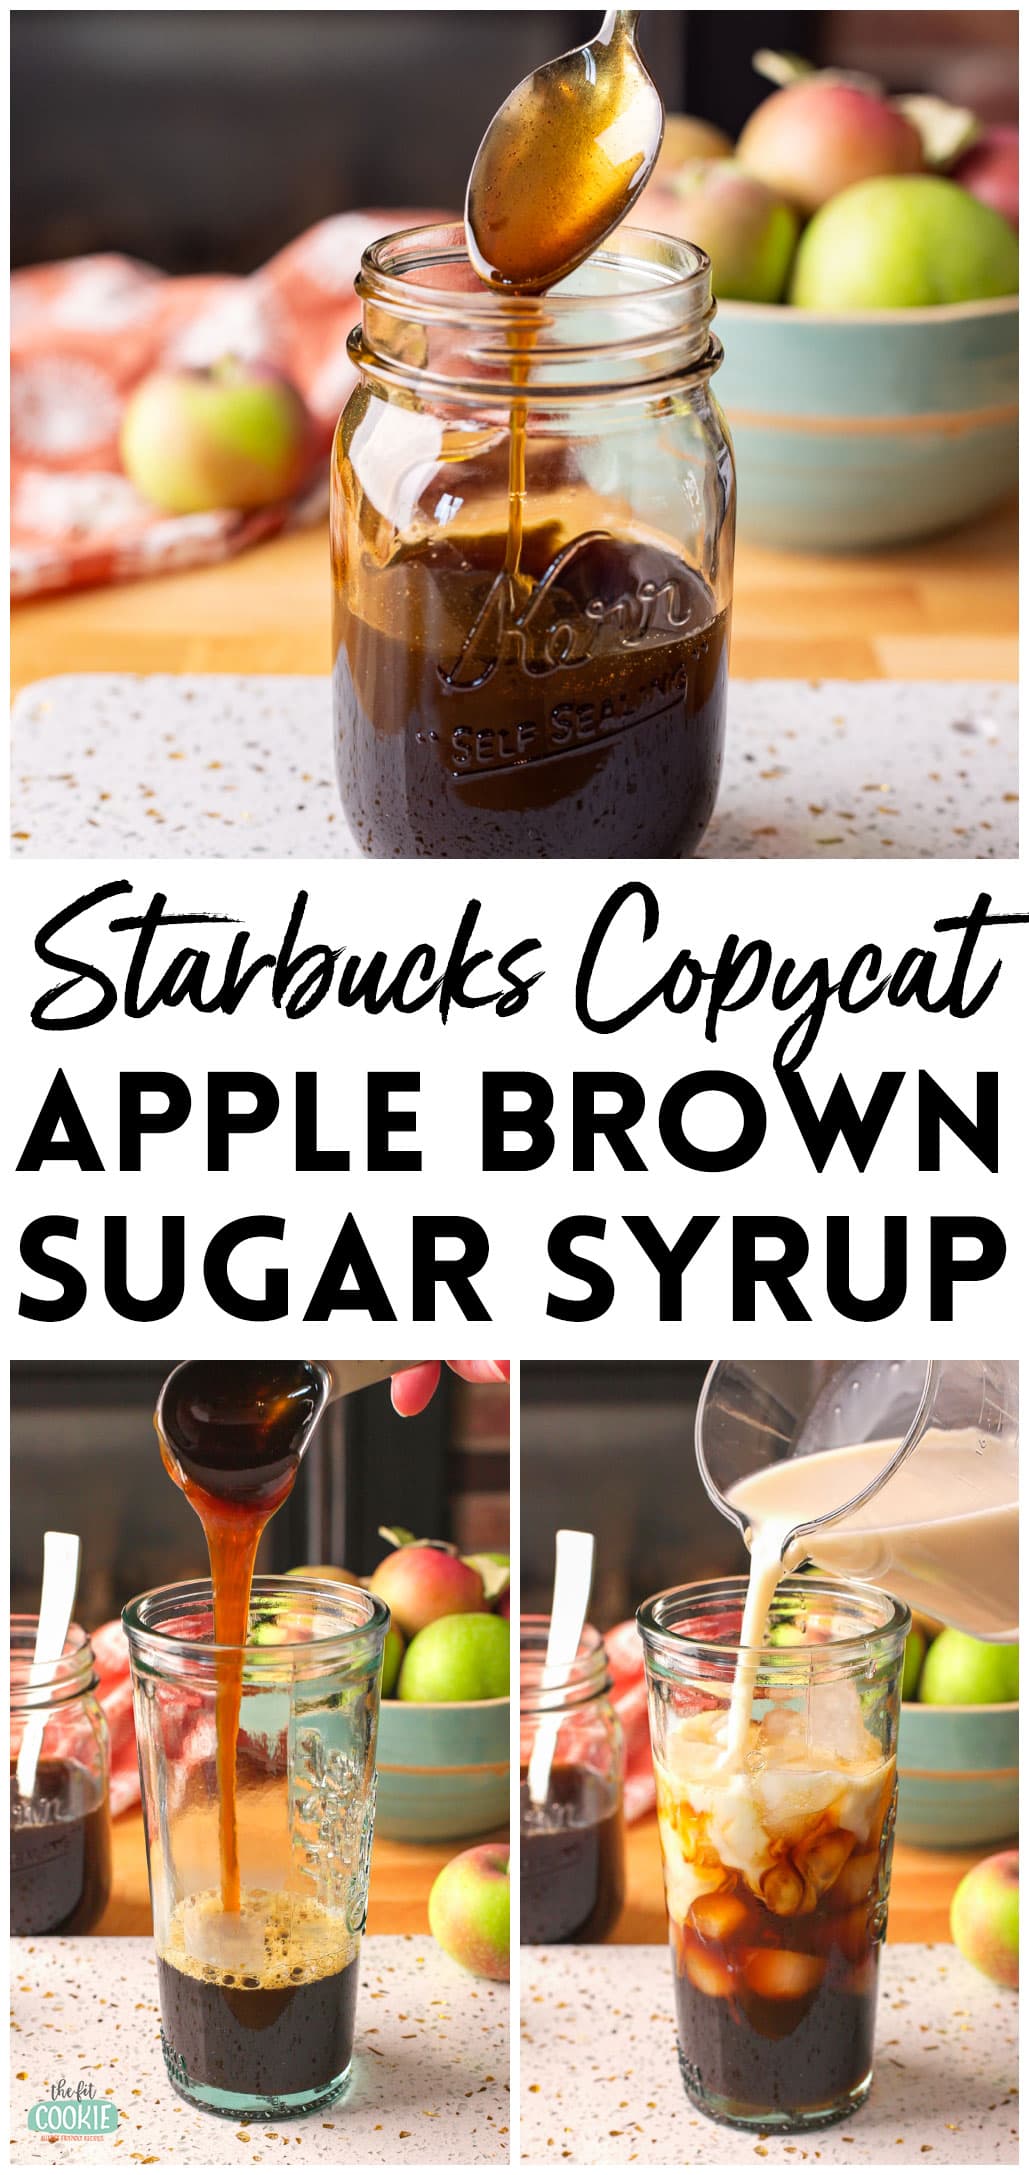 photo collage showing different views of homemade Starbucks copycat brown sugar syrup.